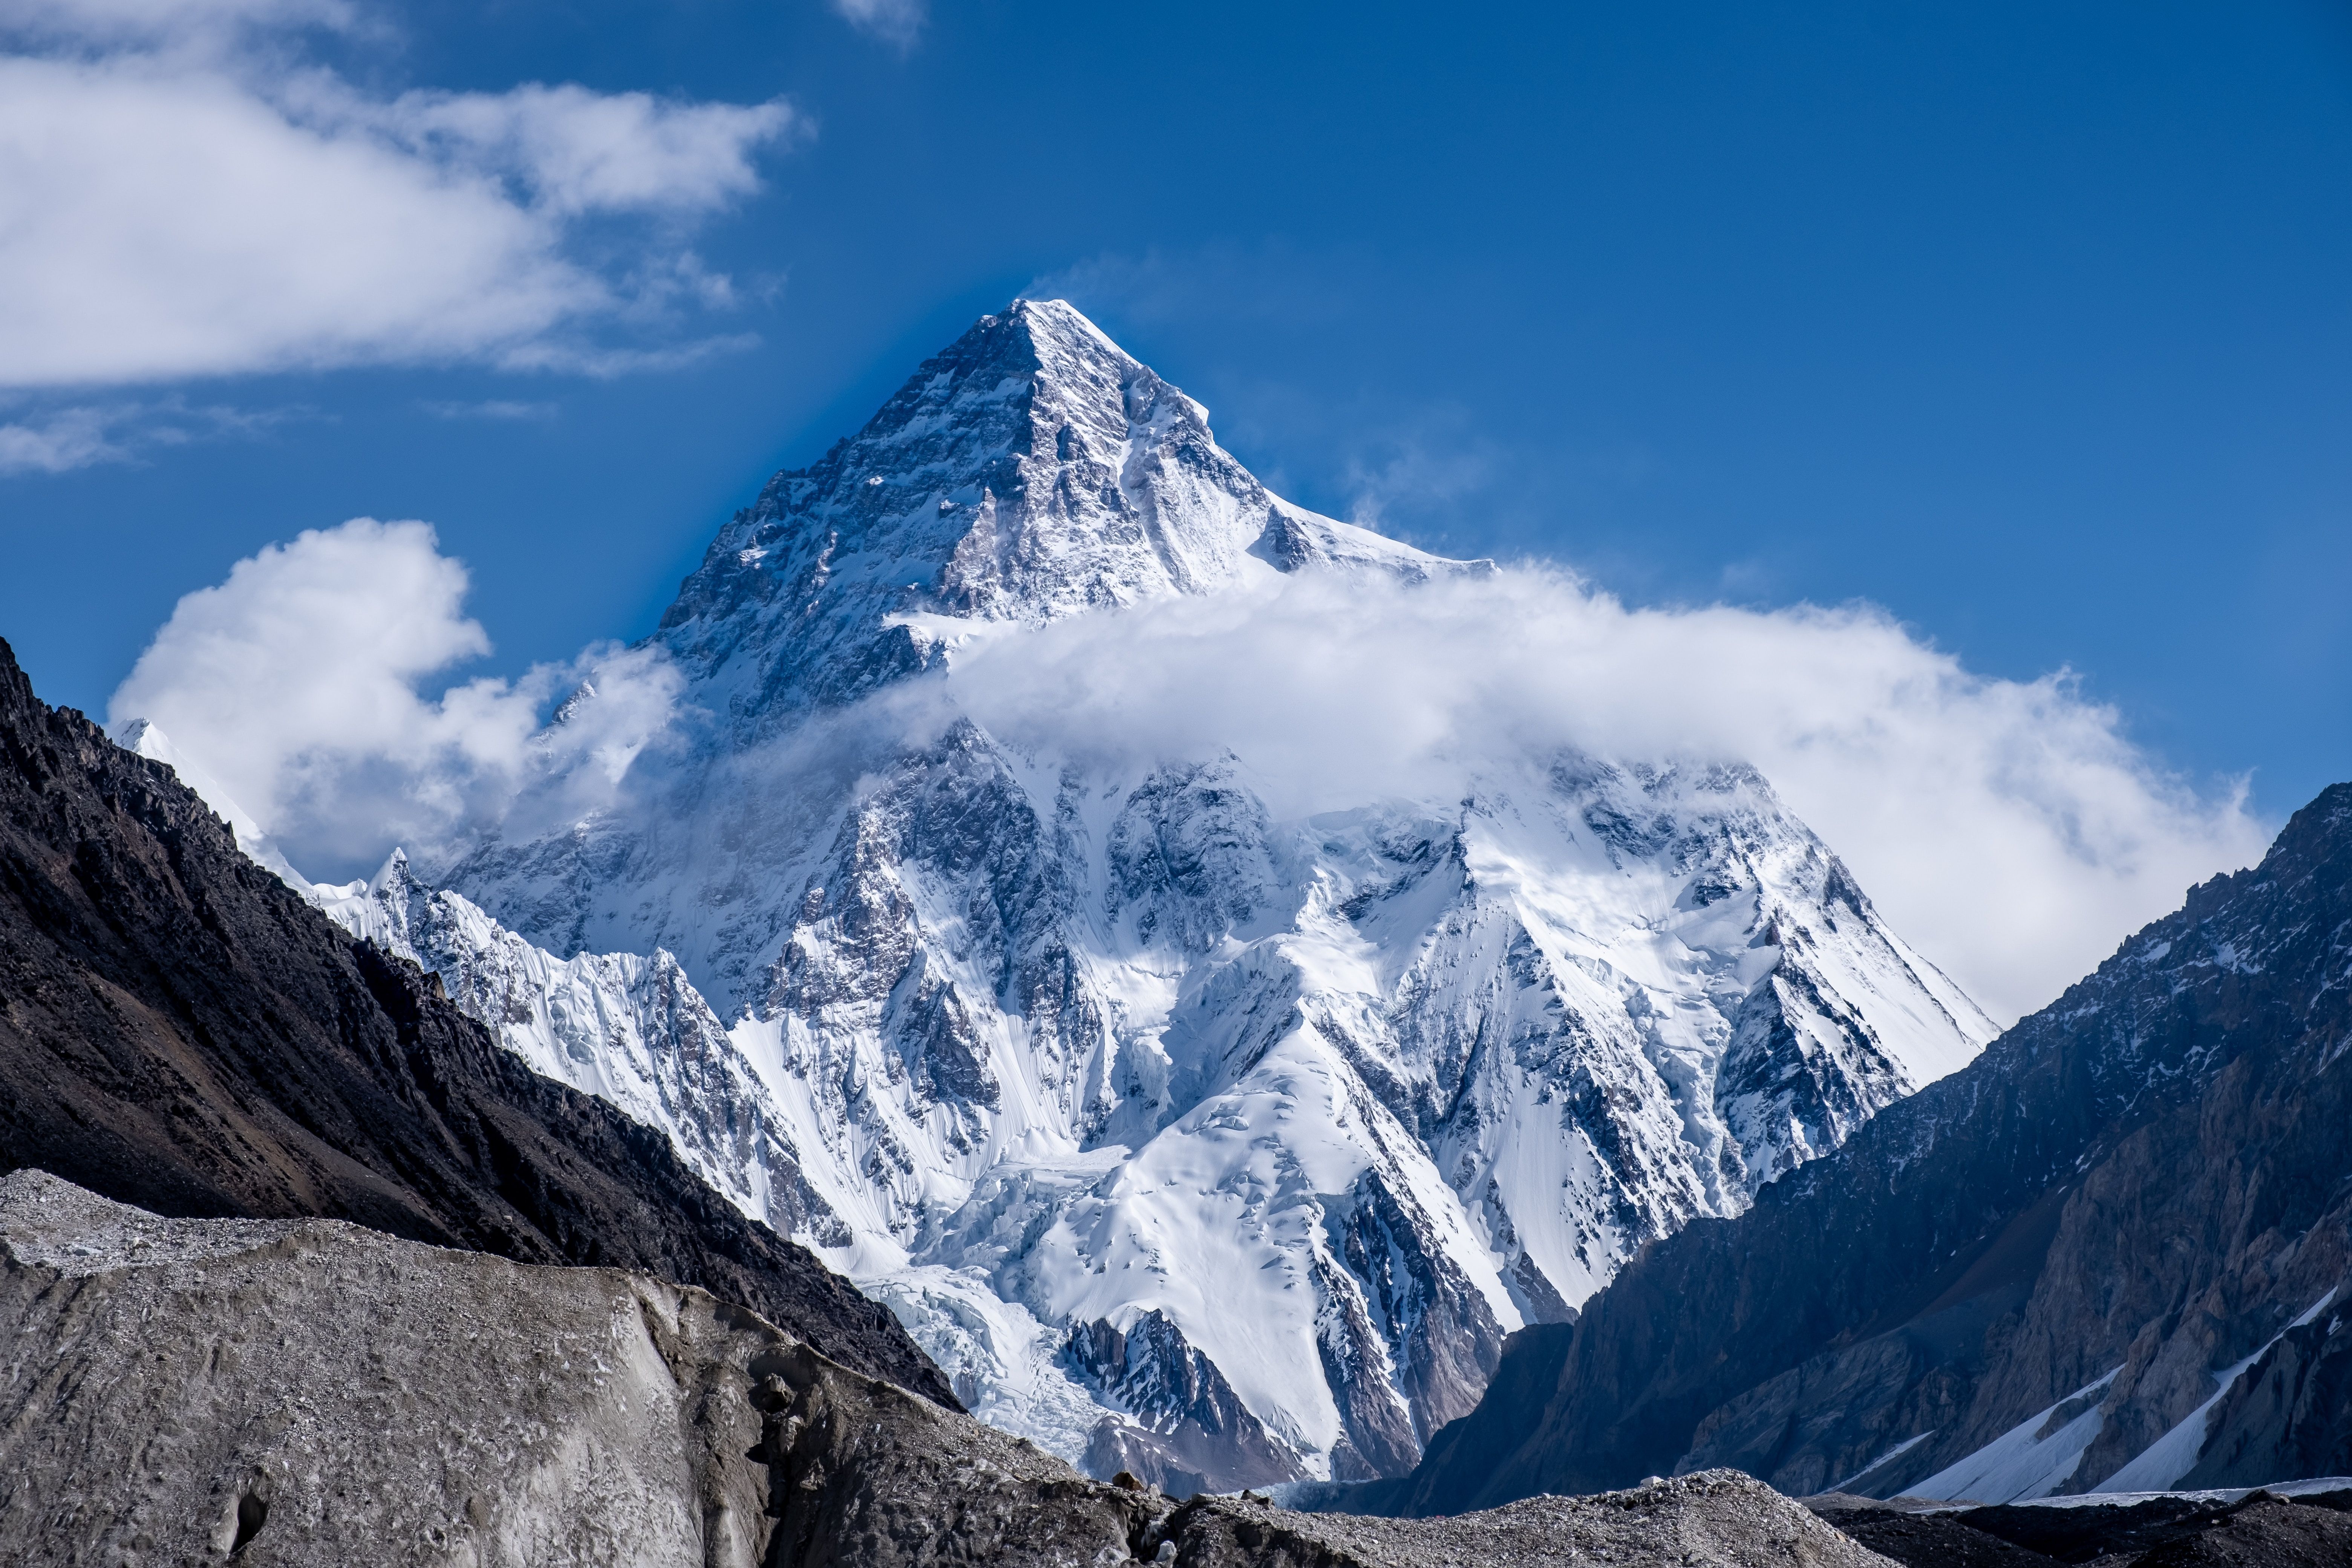 Highest Mountain Peaks in the World (& Locations)